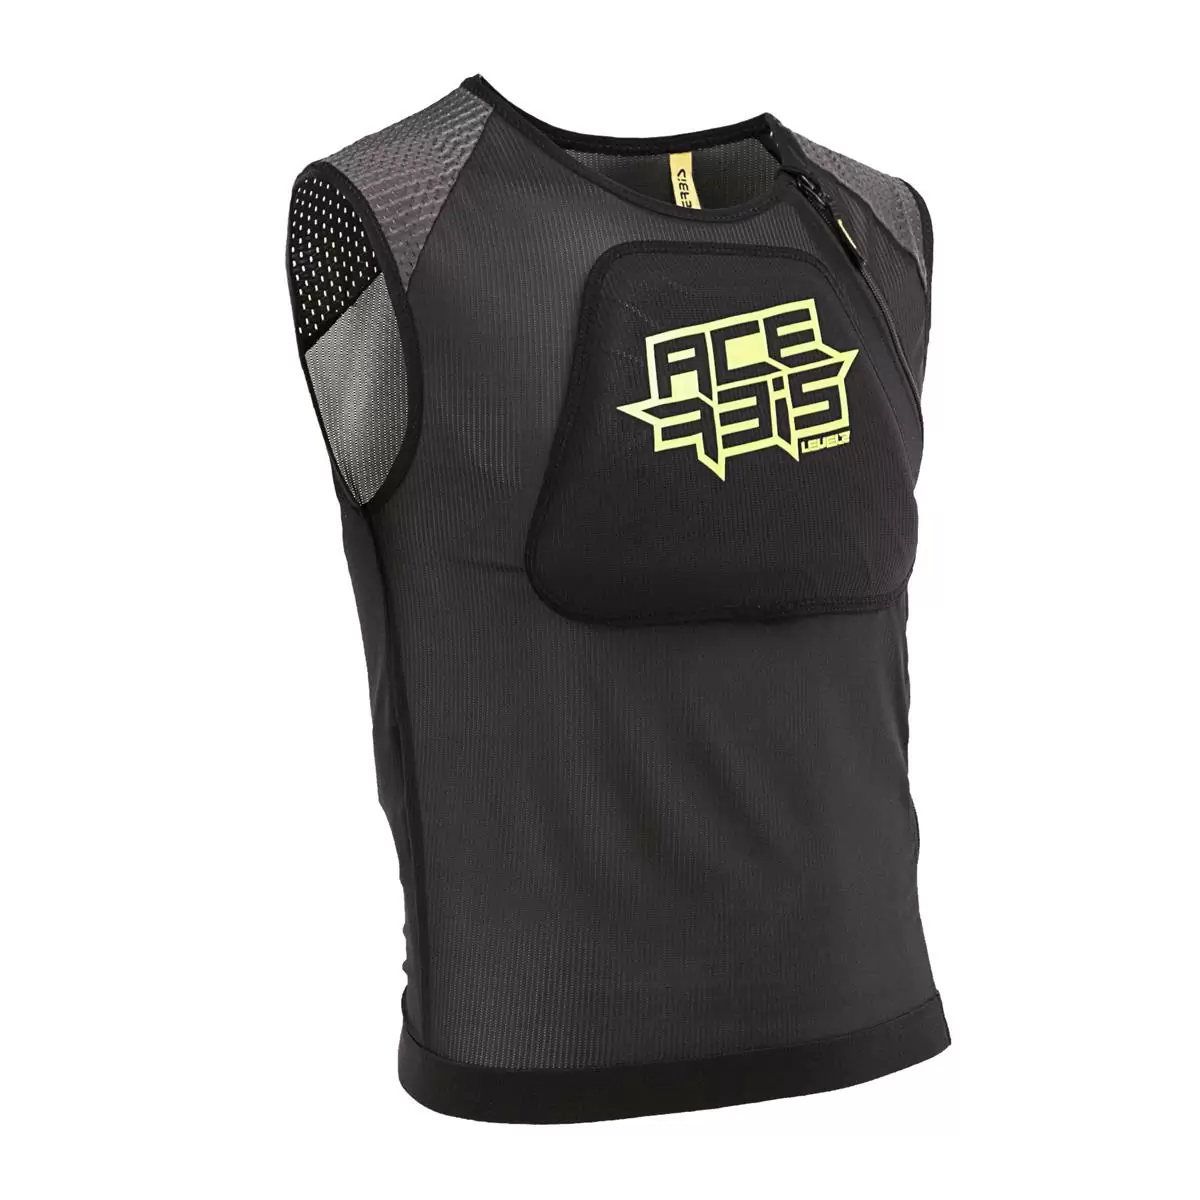 Armoured Vest X-Air Level 2 Black/Yellow Size L/XL - image